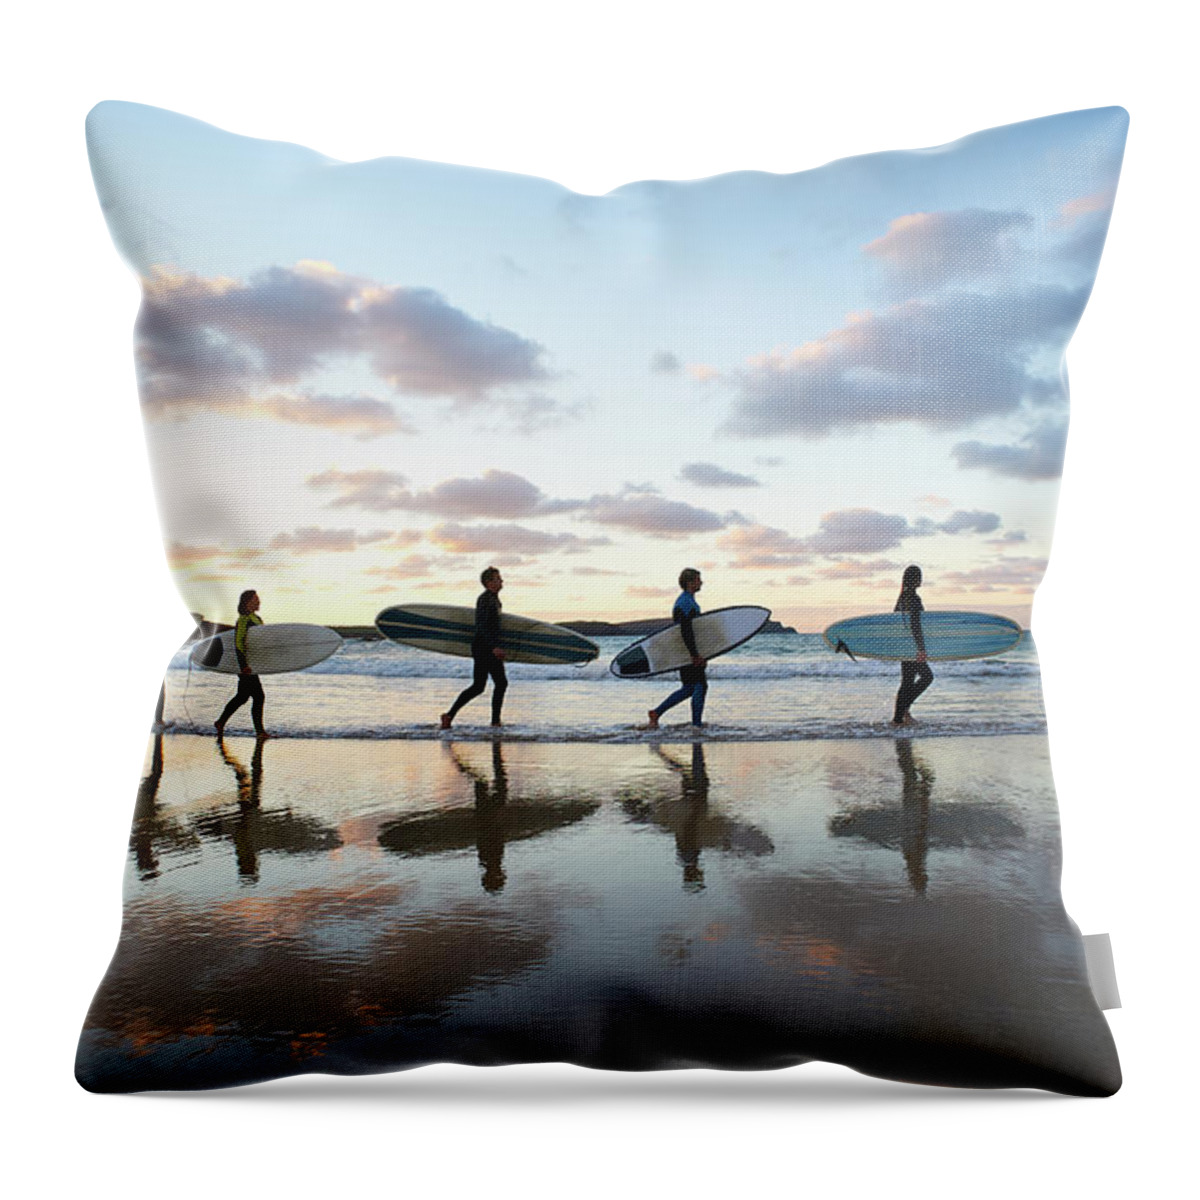 Summer Throw Pillow featuring the photograph Five Surfers Walk Along Beach With Surf by Dougal Waters